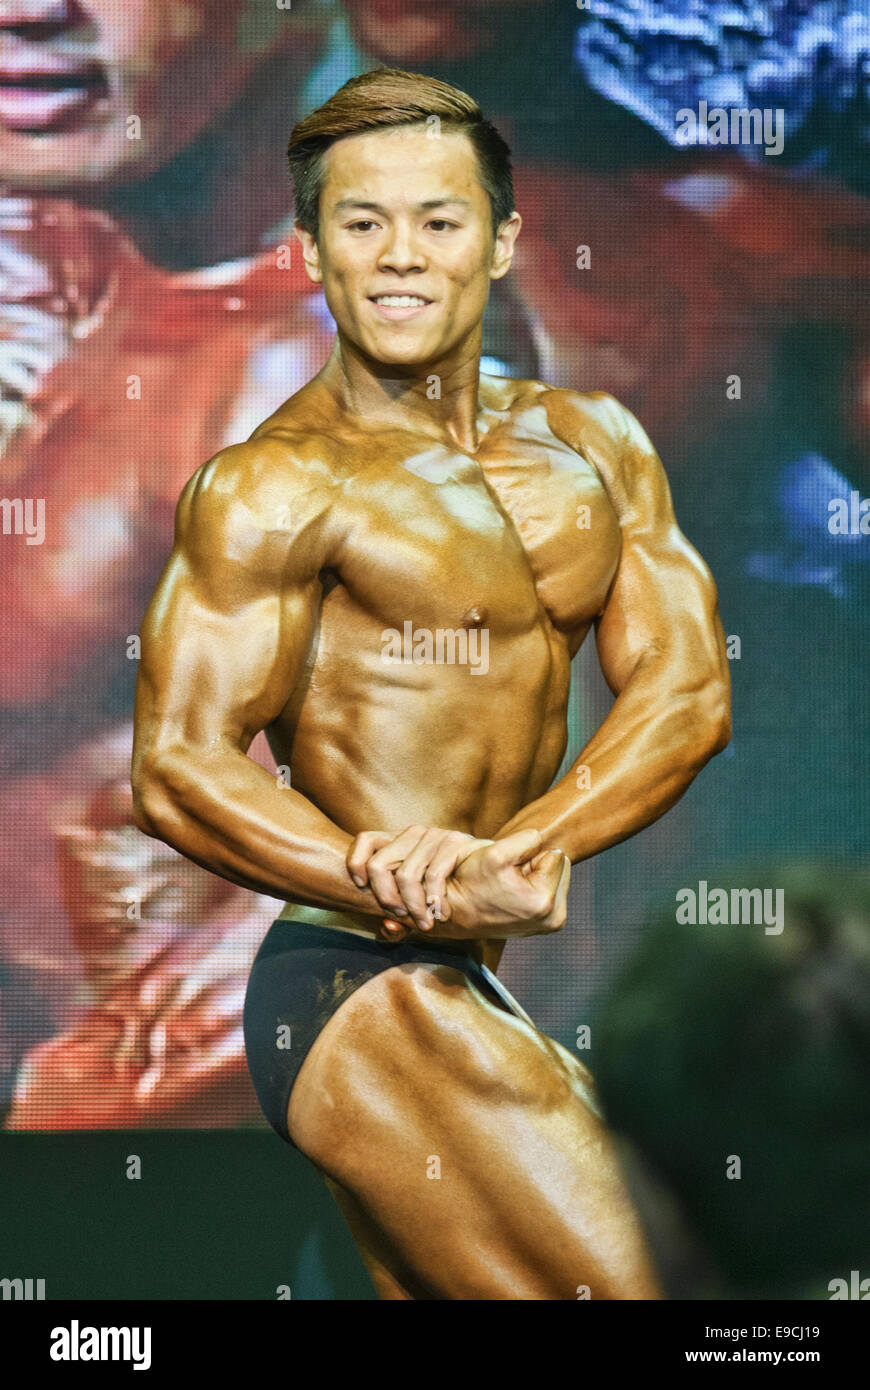 Bodybuilding competition at the Central World Bangkok, Thailand Stock Photo